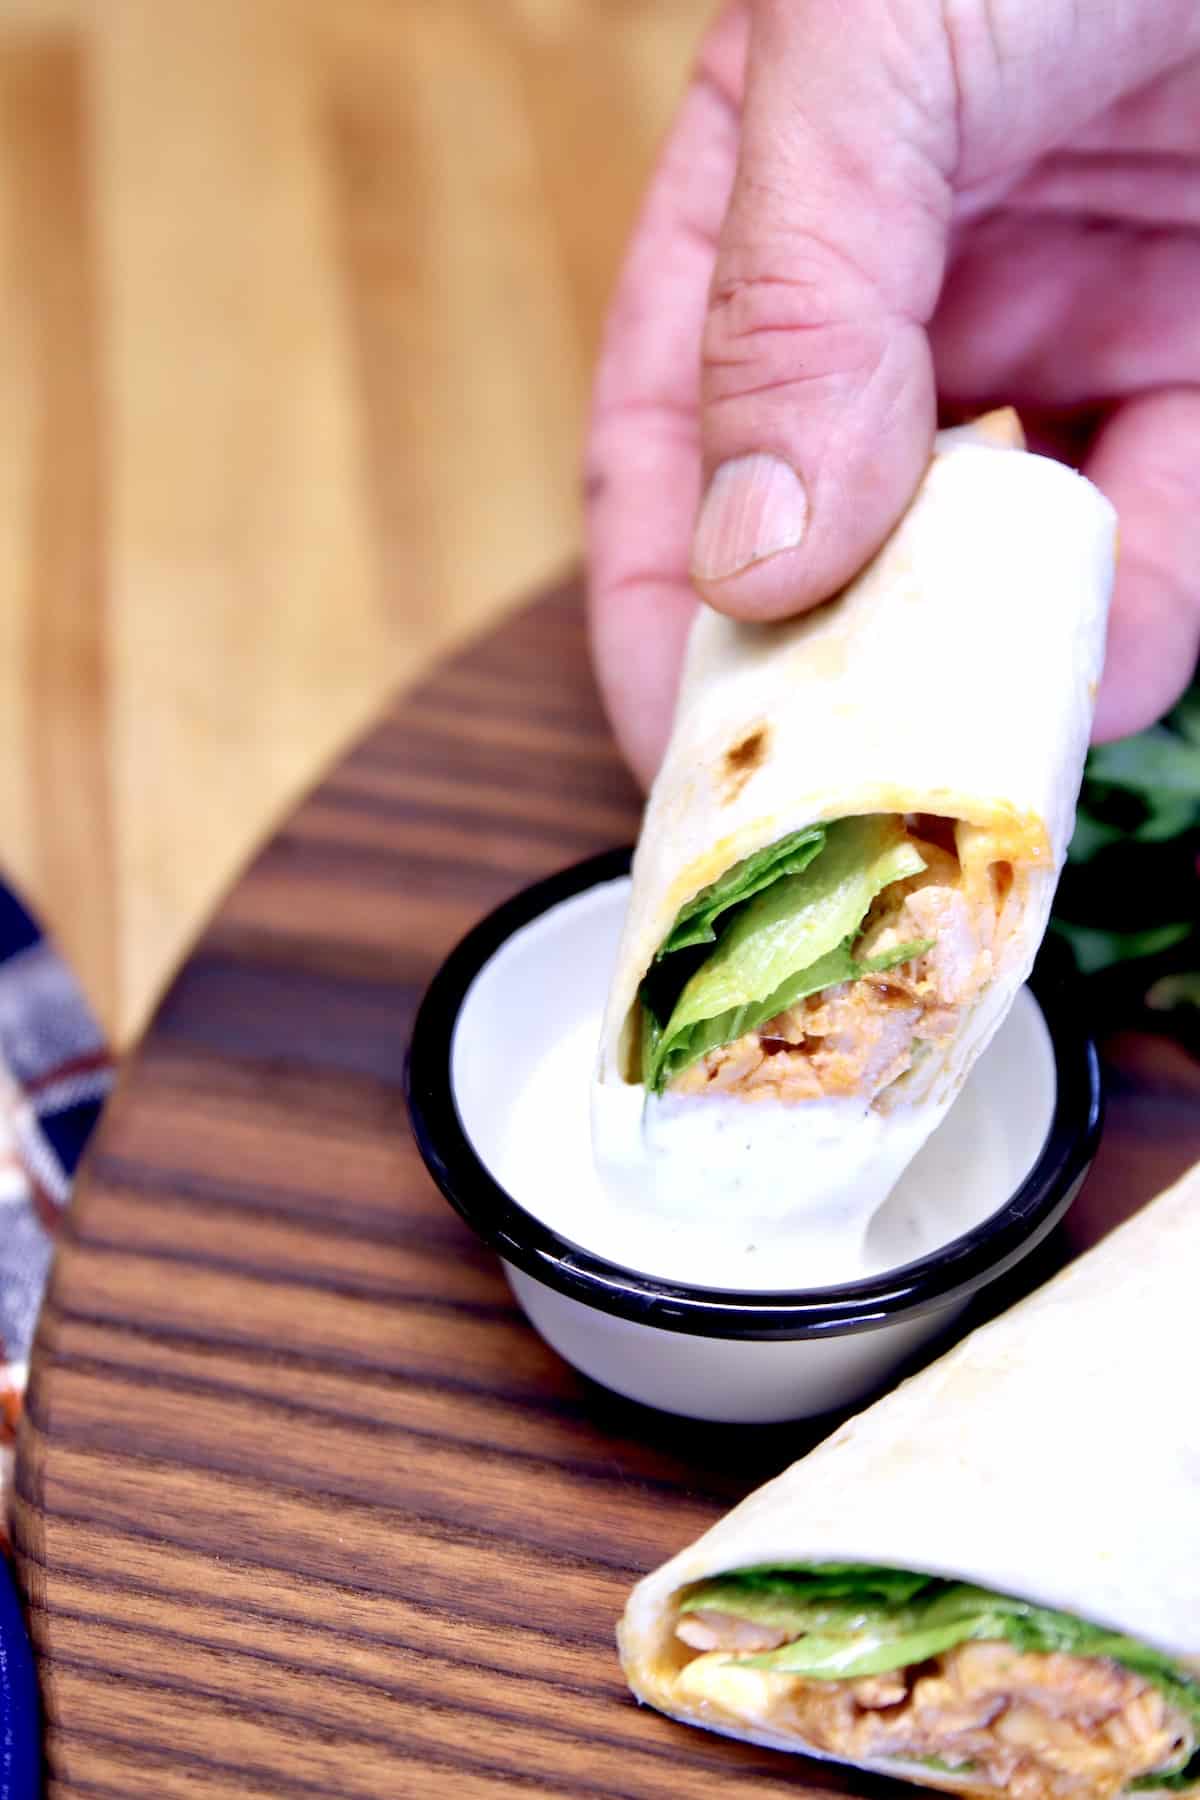 Dipping chicken wrap in ranch dressing.